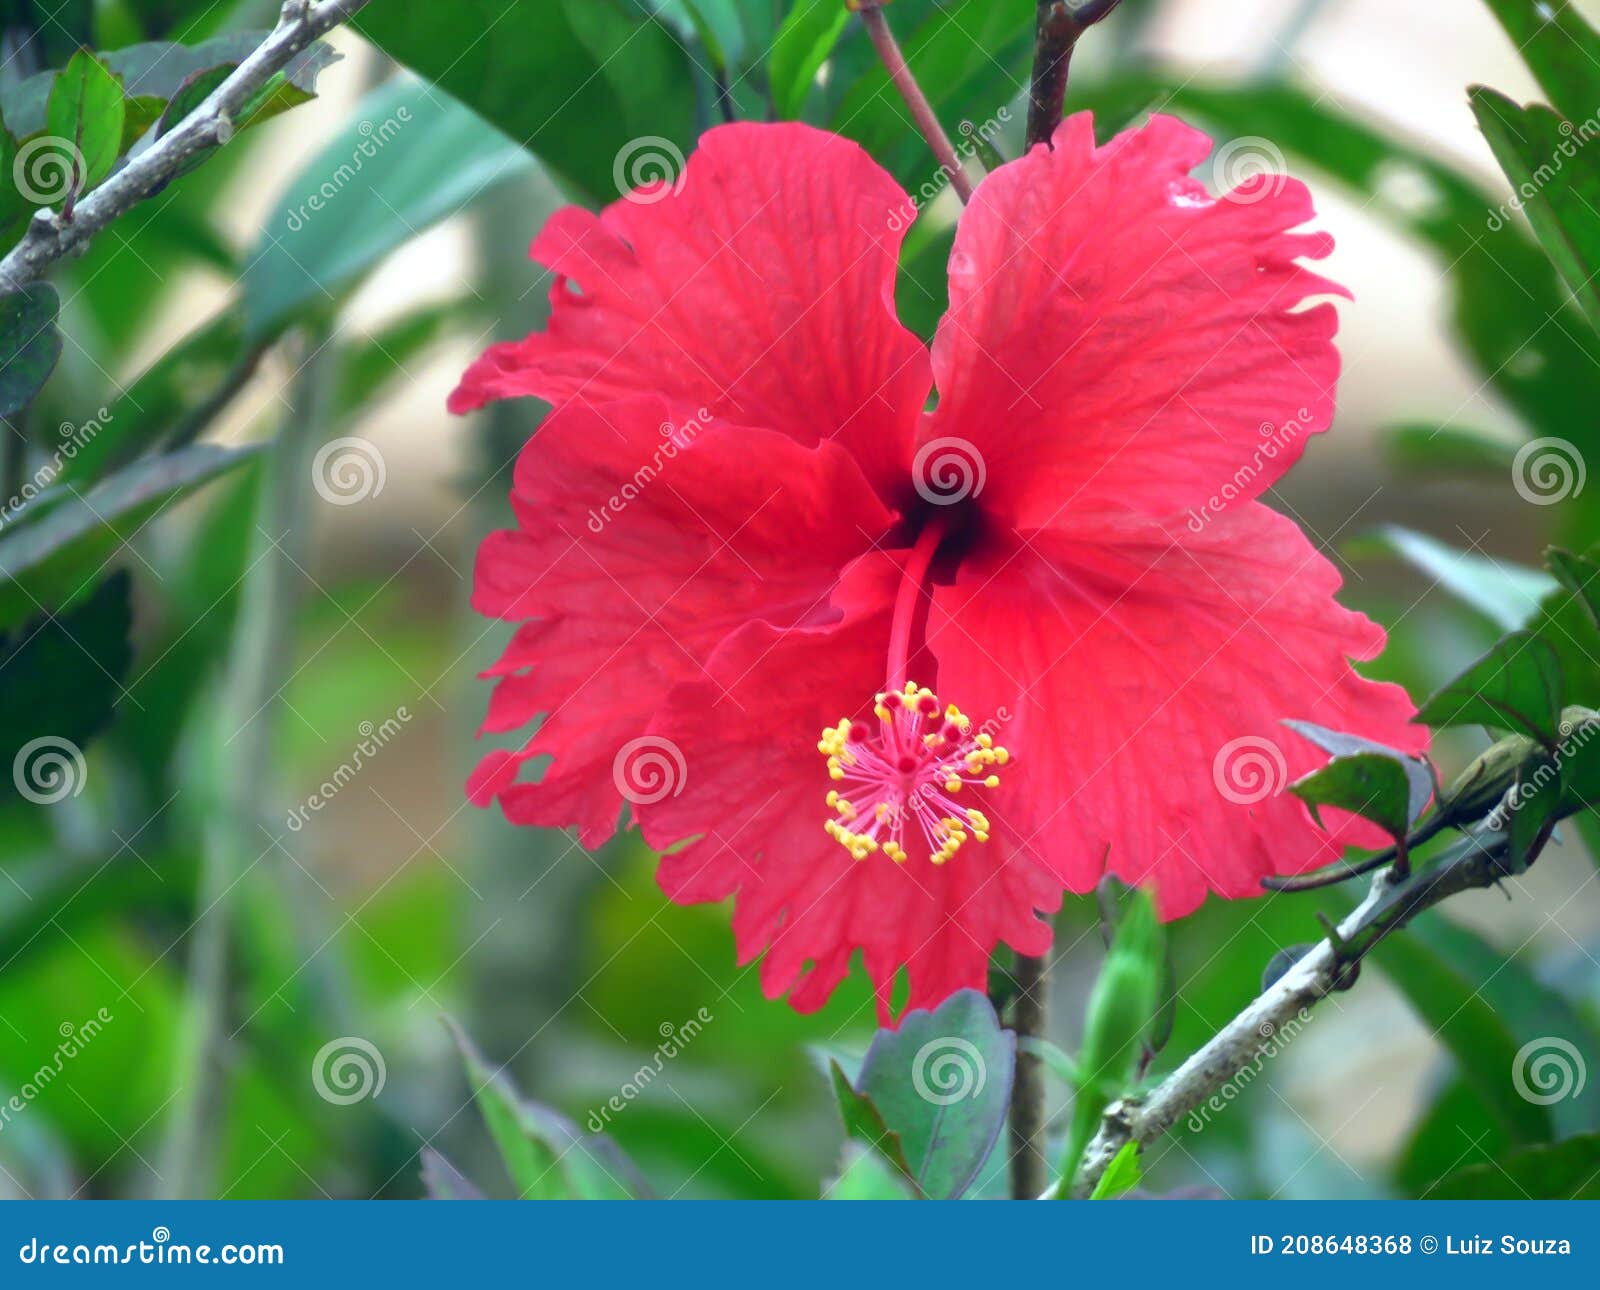 the beauty usefulness of hibiscus